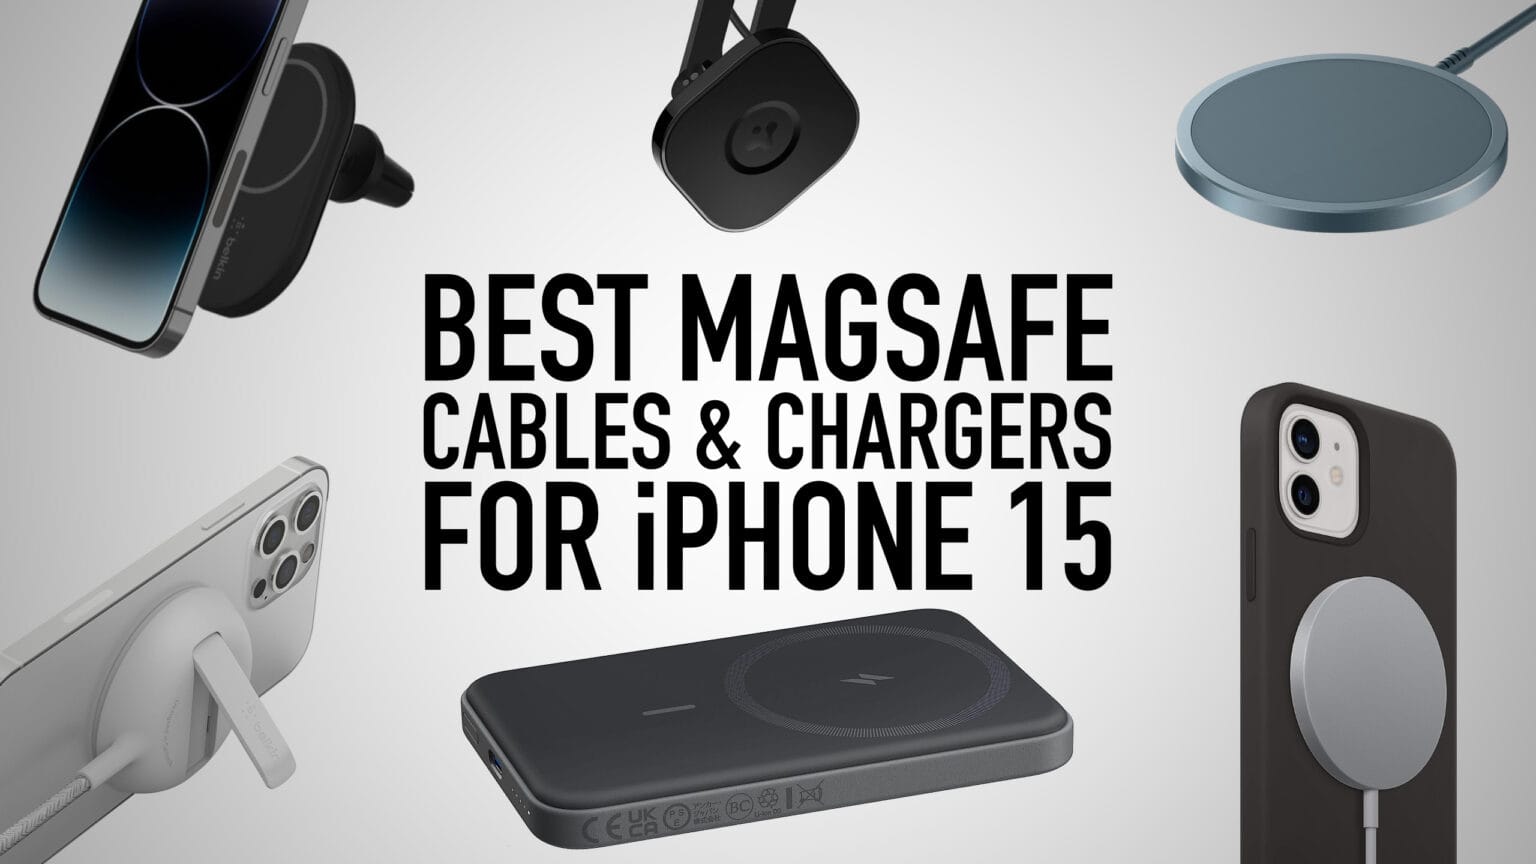 These are the best MagSafe cables and chargers for iPhone 15.